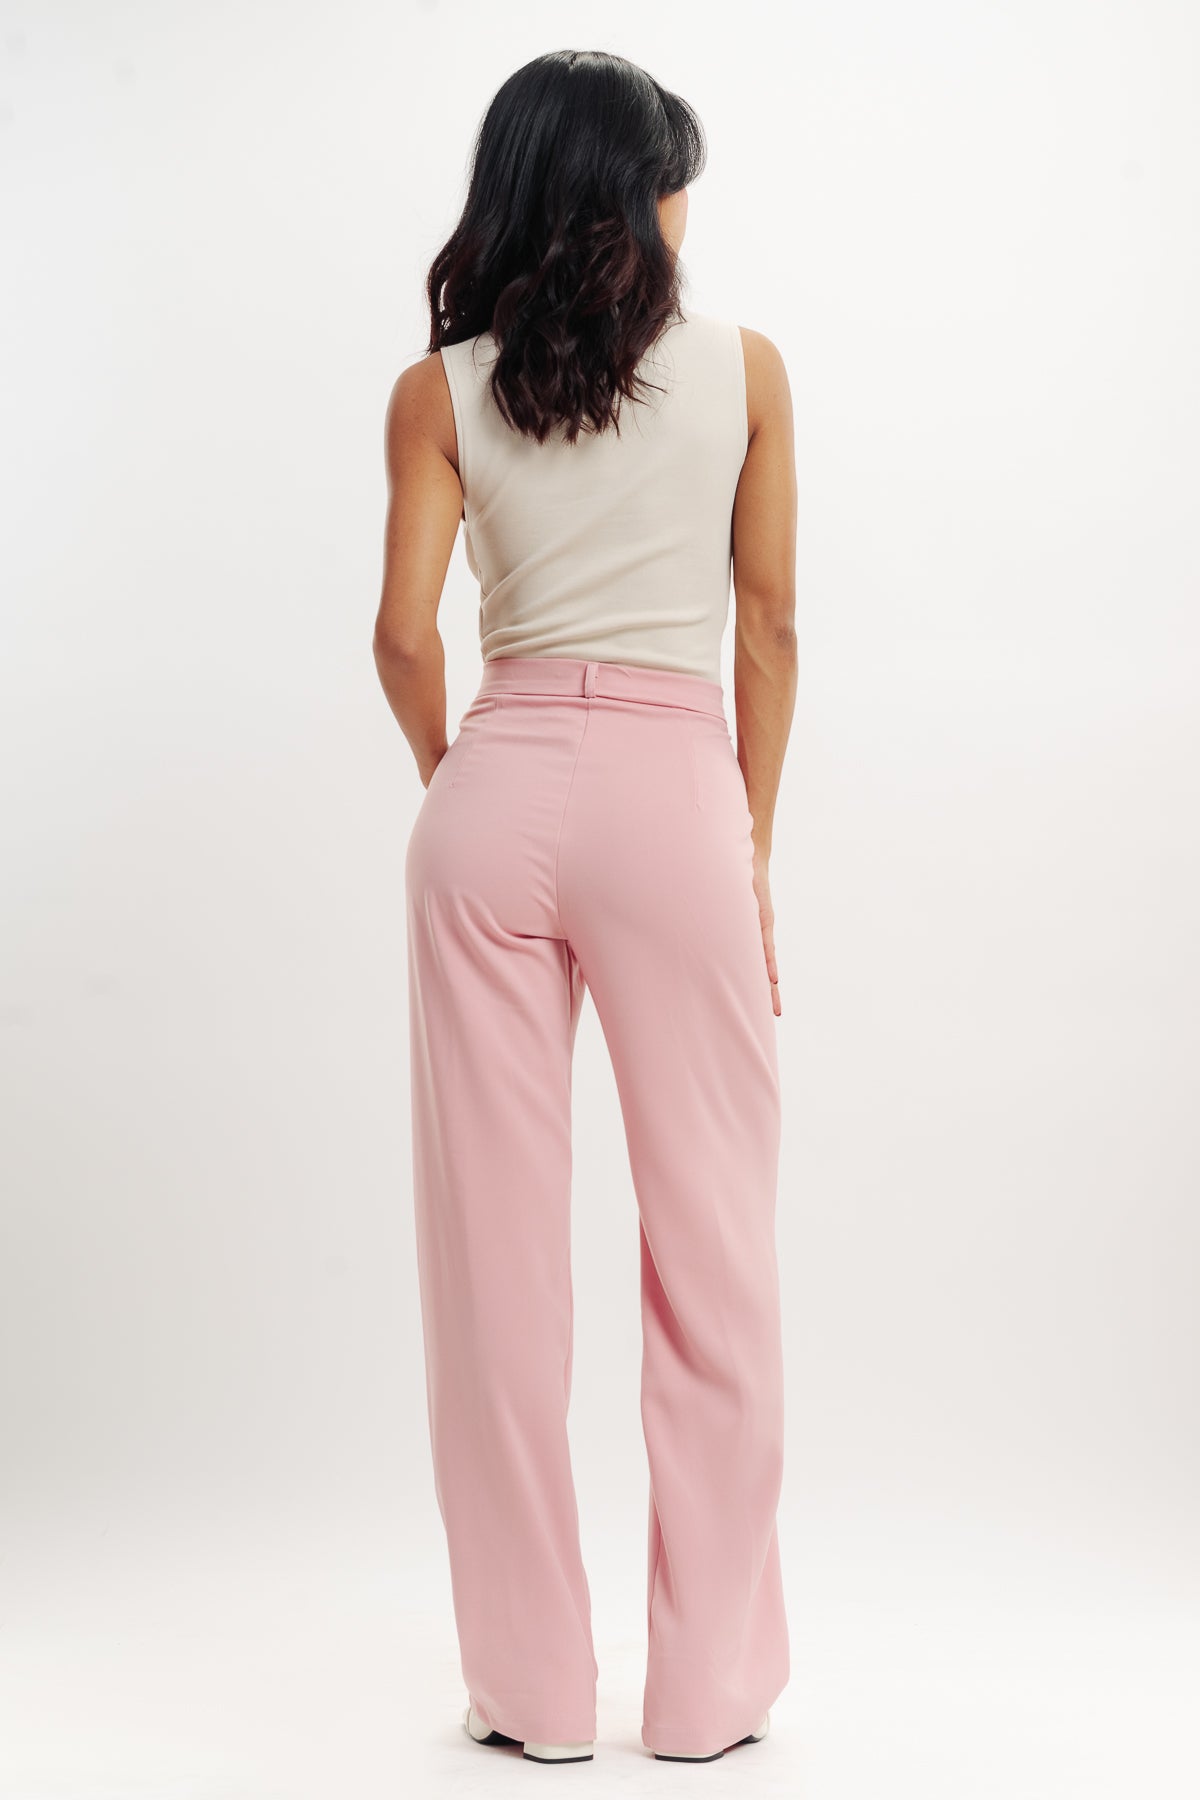 BABY PINK PLEATED STRAIGHT FIT KOREAN PANT